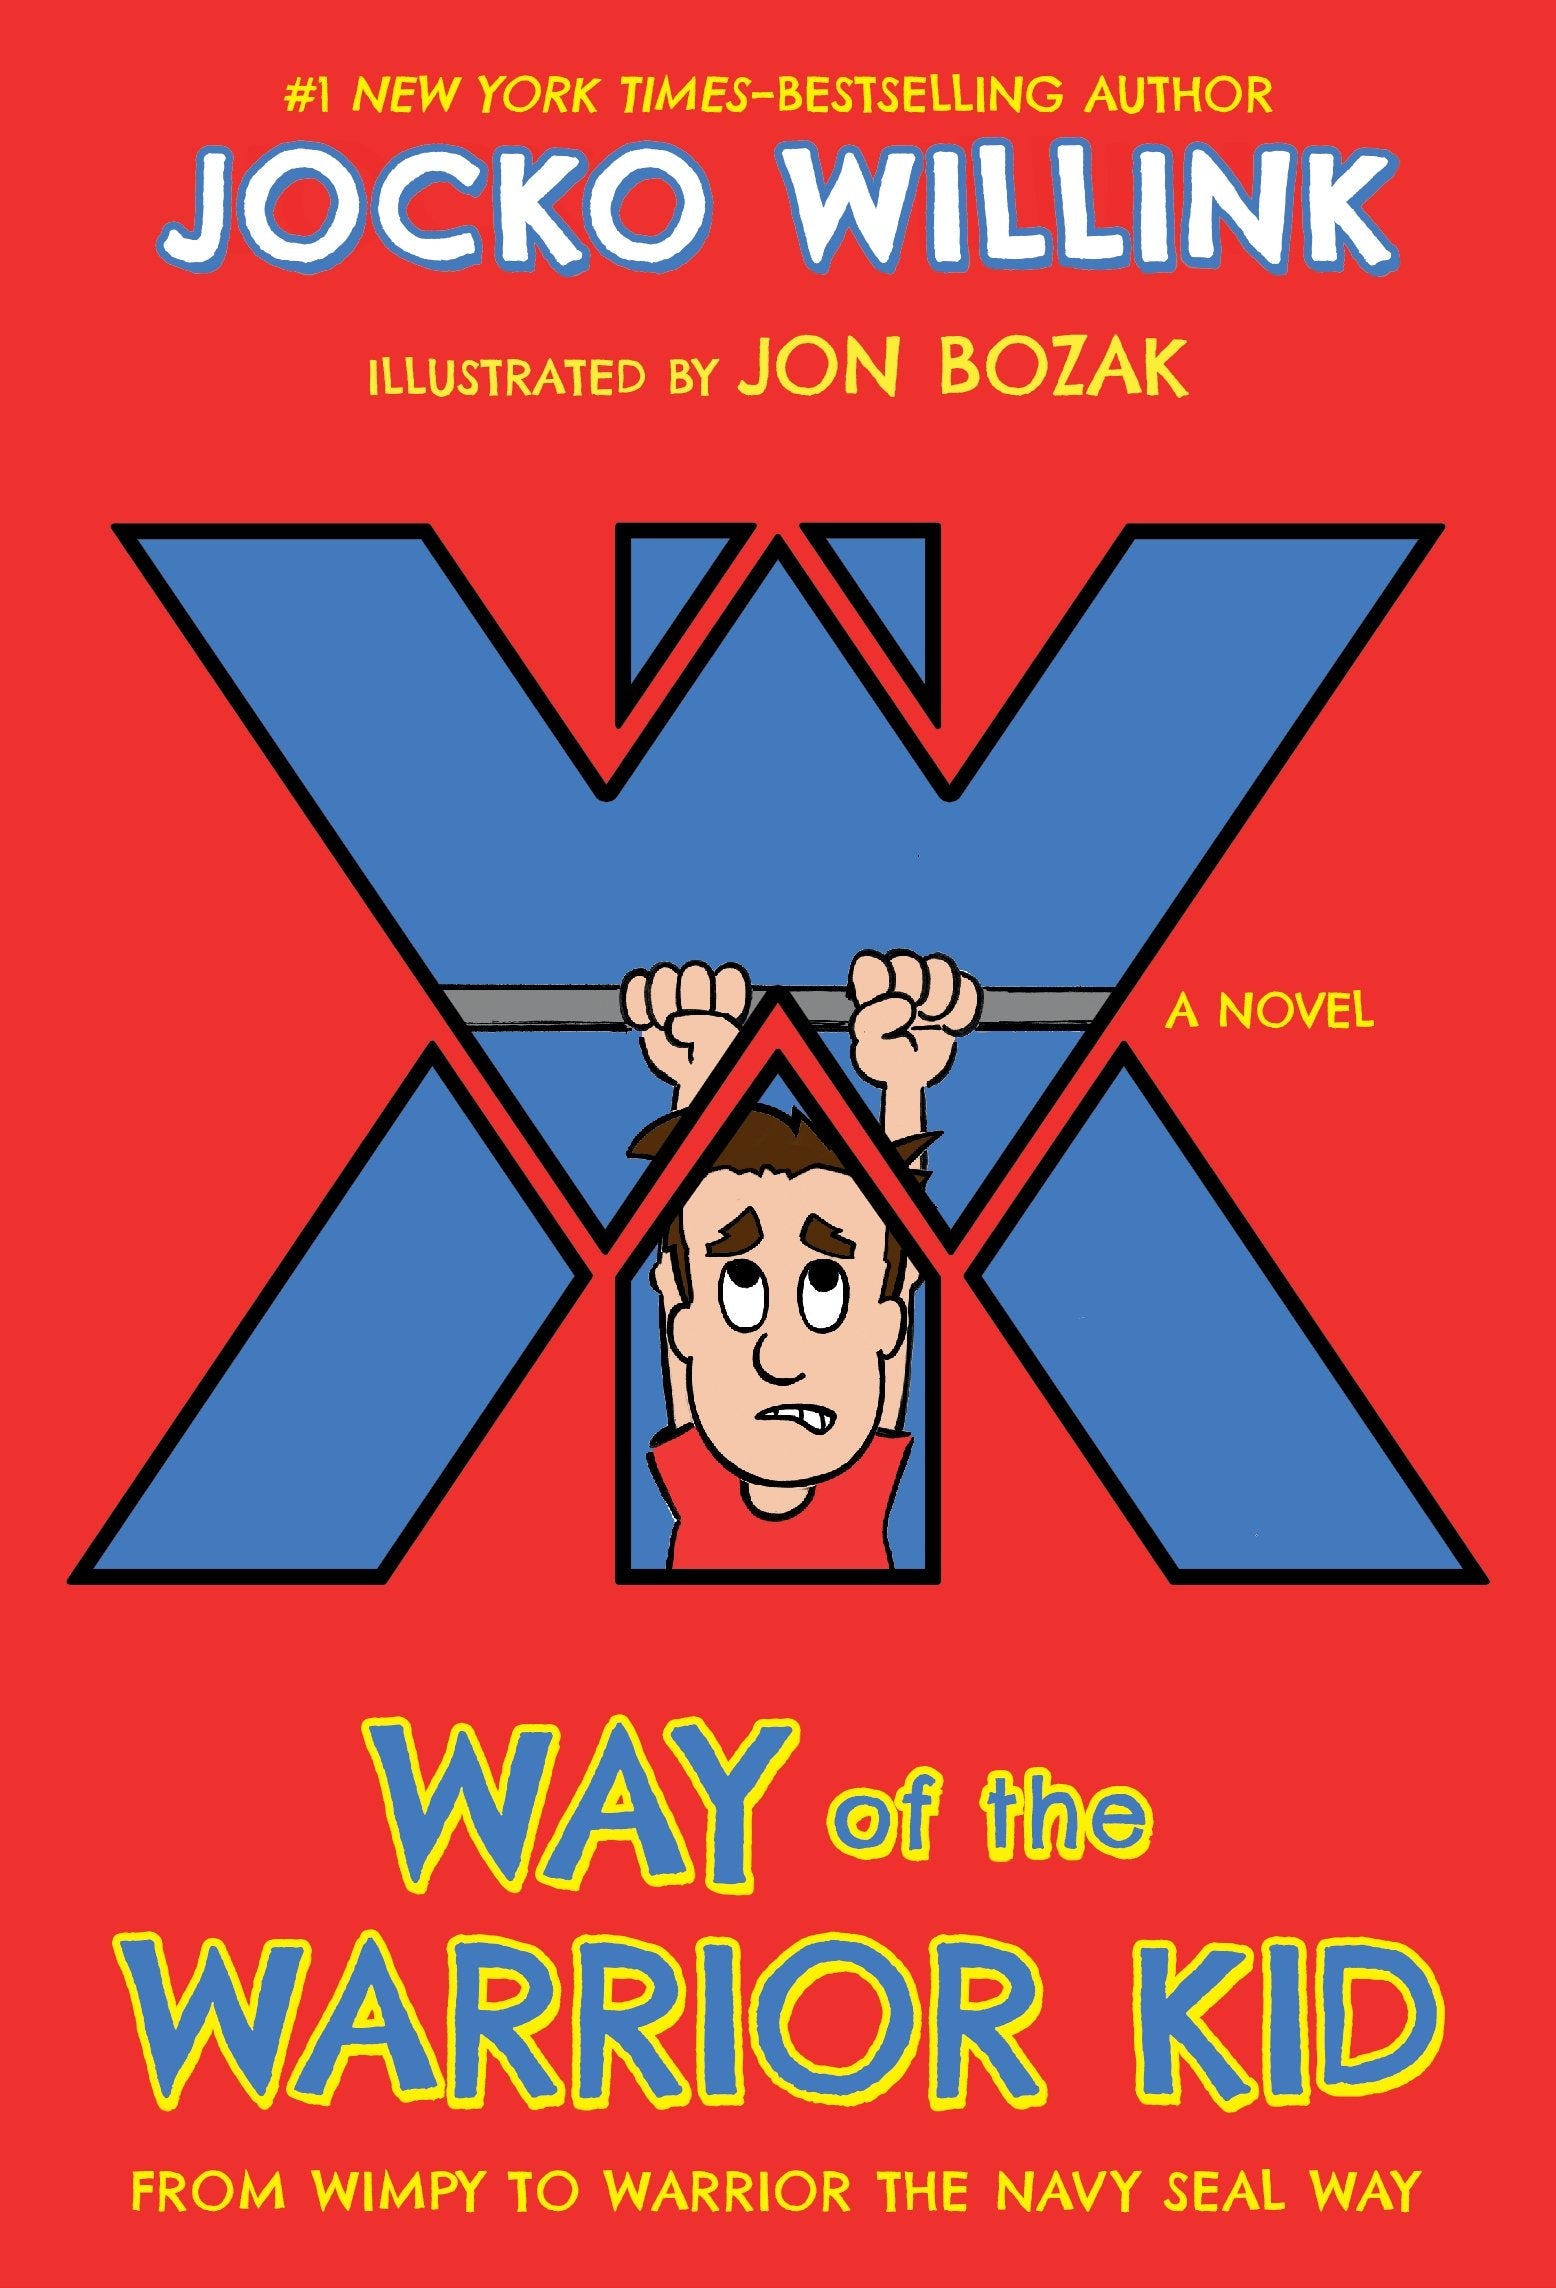 Way of the Warrior Kid: From Wimpy to Warrior the Navy Seal Way: A Novel by Willink, Jocko